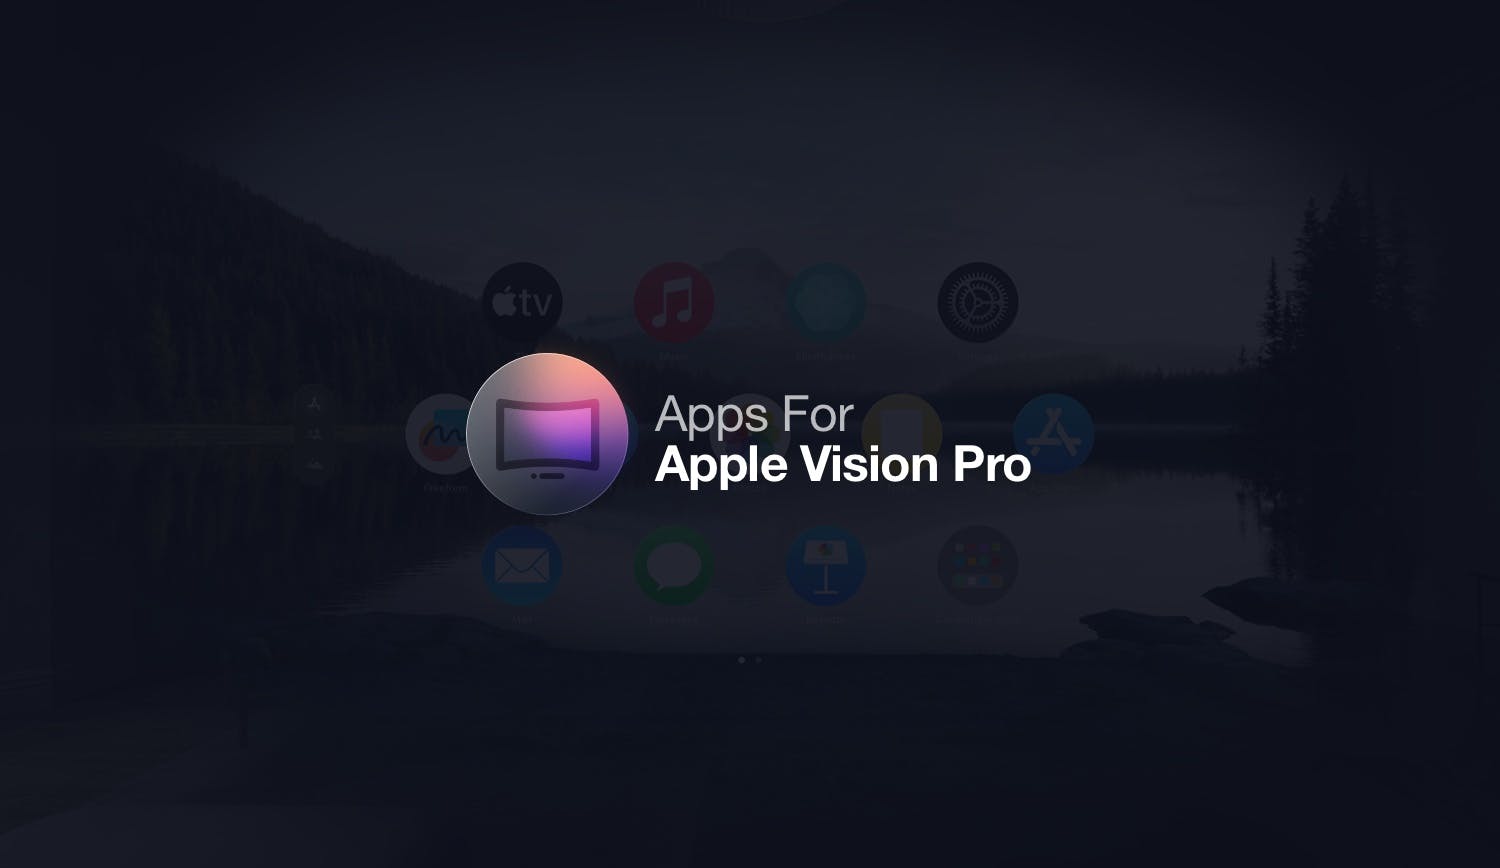 We Built A Place For visionOS Apps